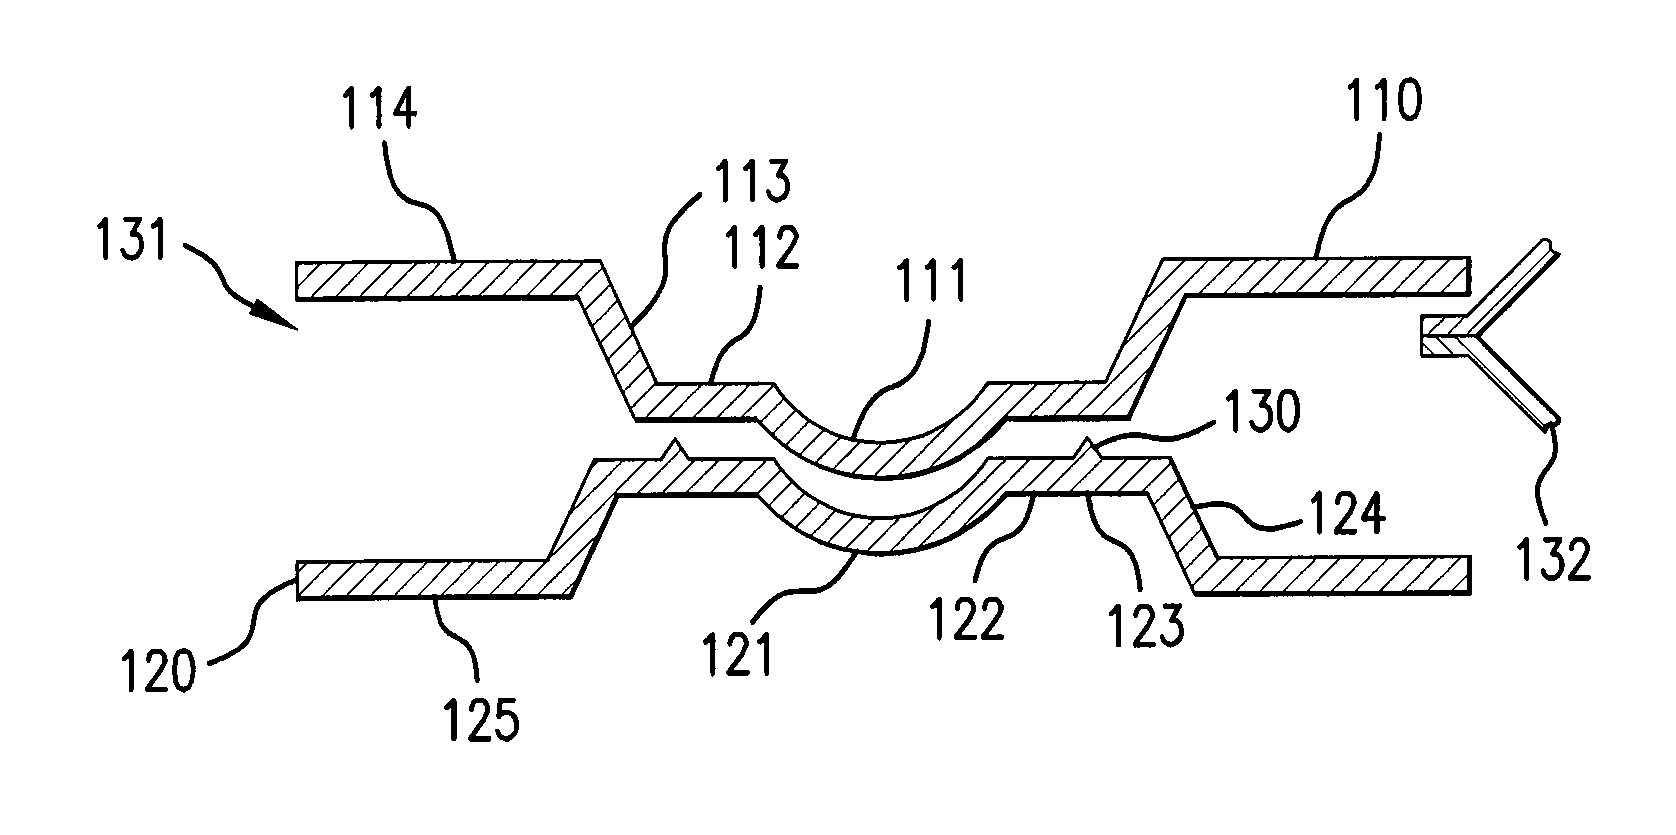 Casting cup assembly for forming an ophthalmic device